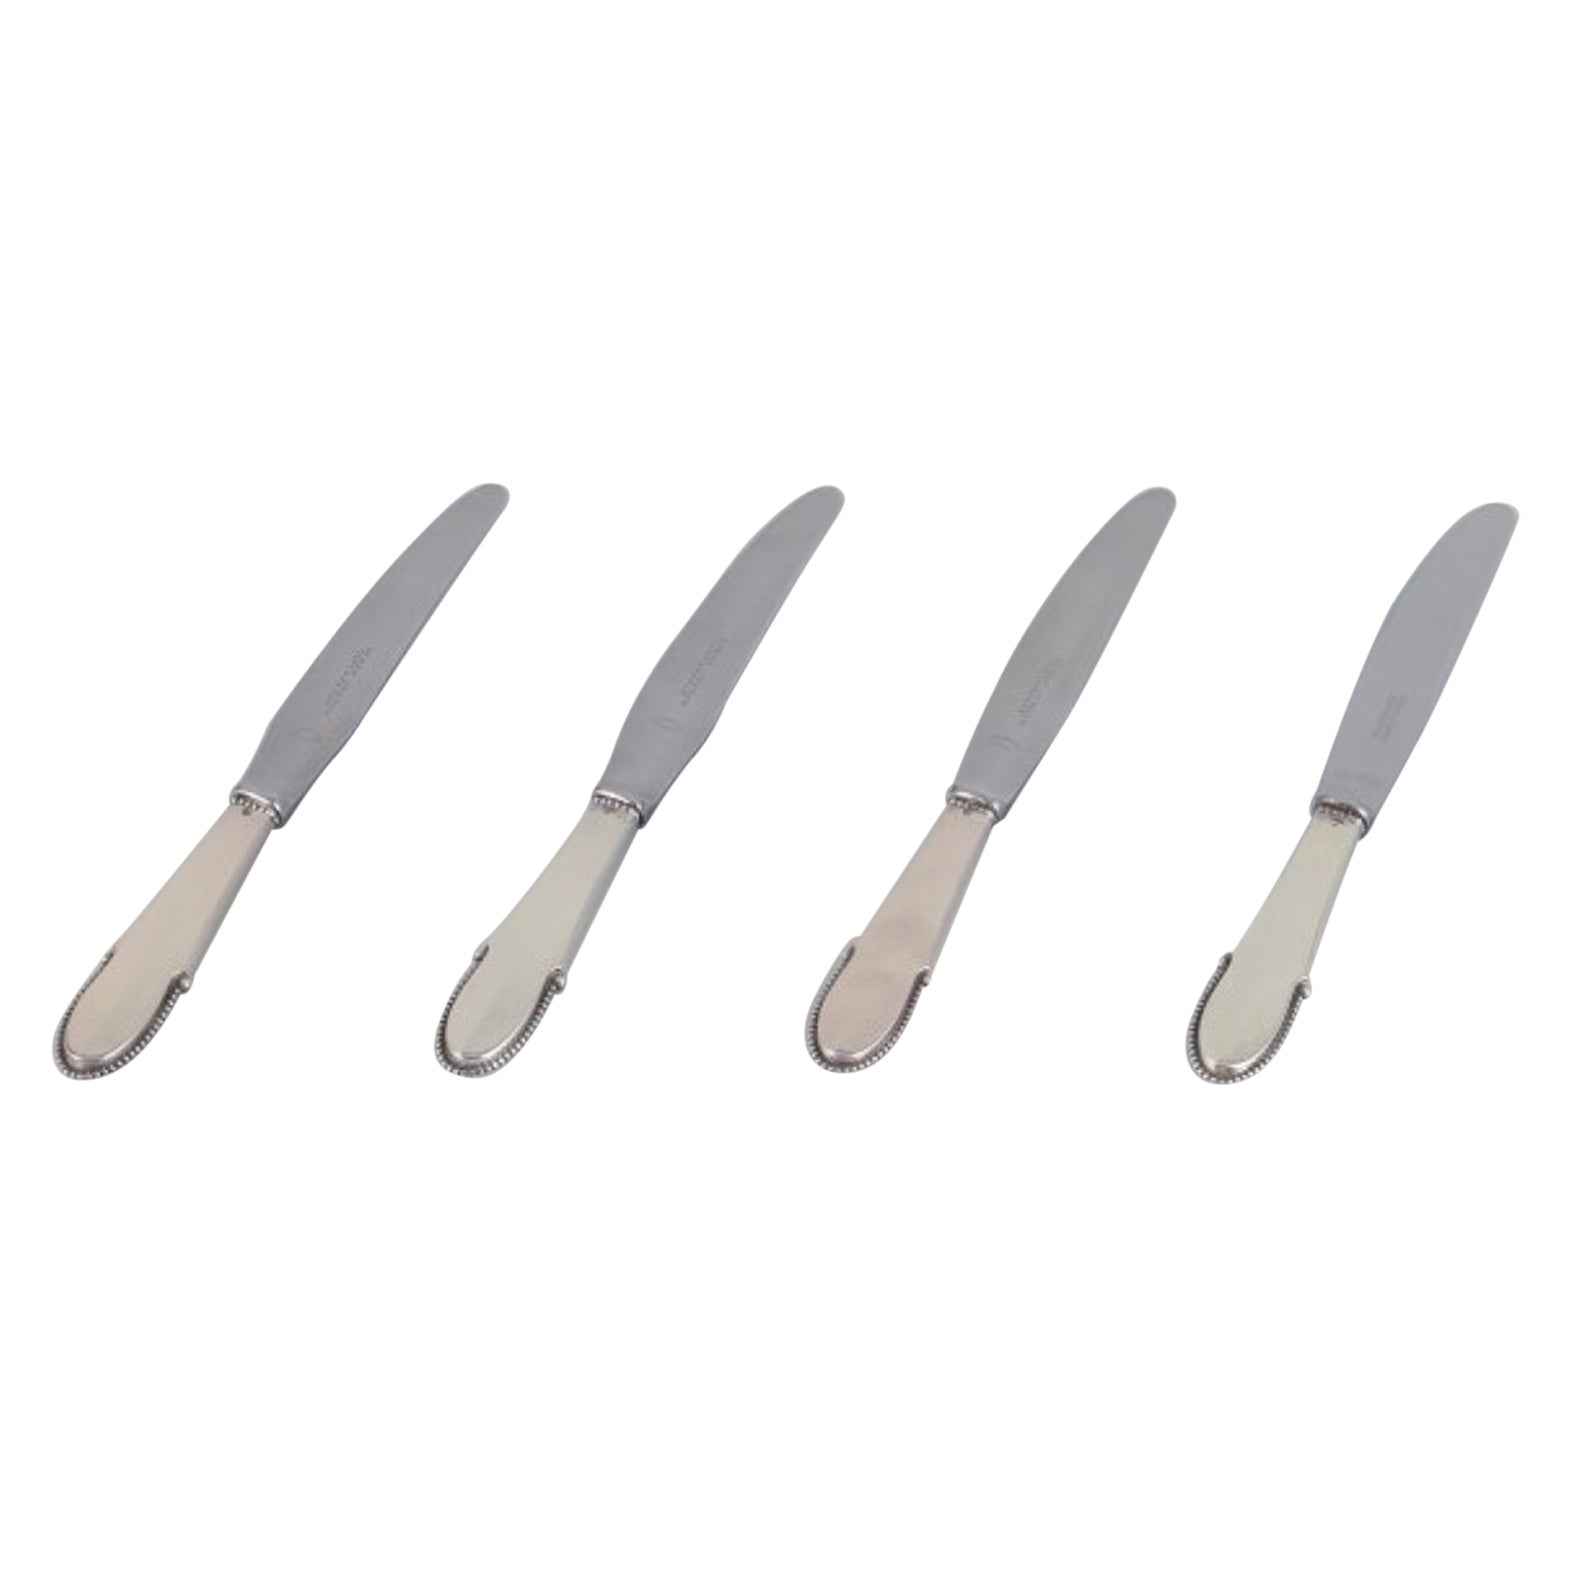 Georg Jensen, set of four Beaded dinner knives with short handles in silver